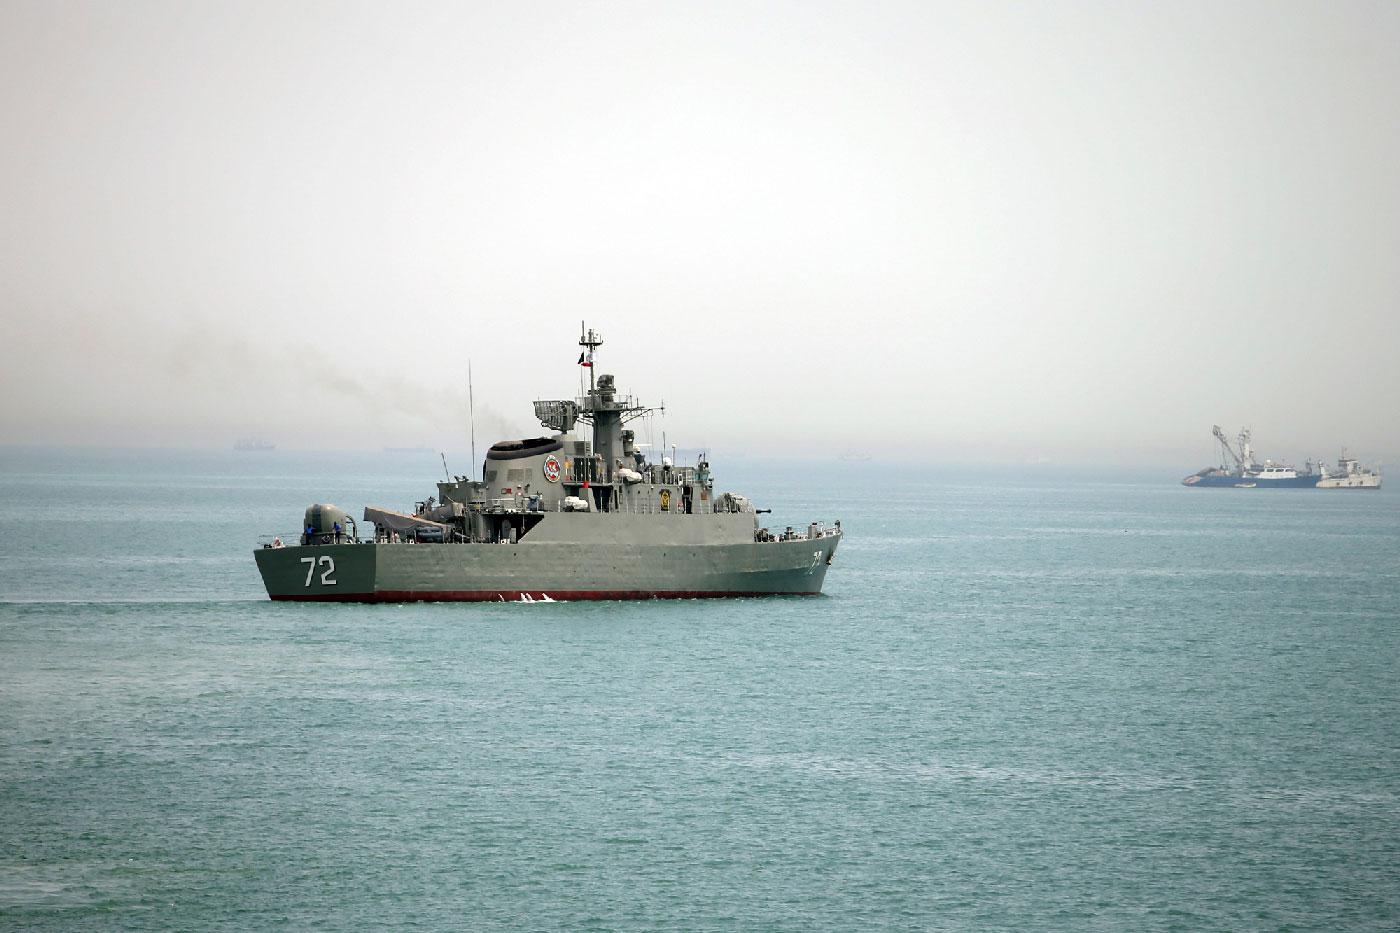 Iran's navy has extended its reach in recent years.